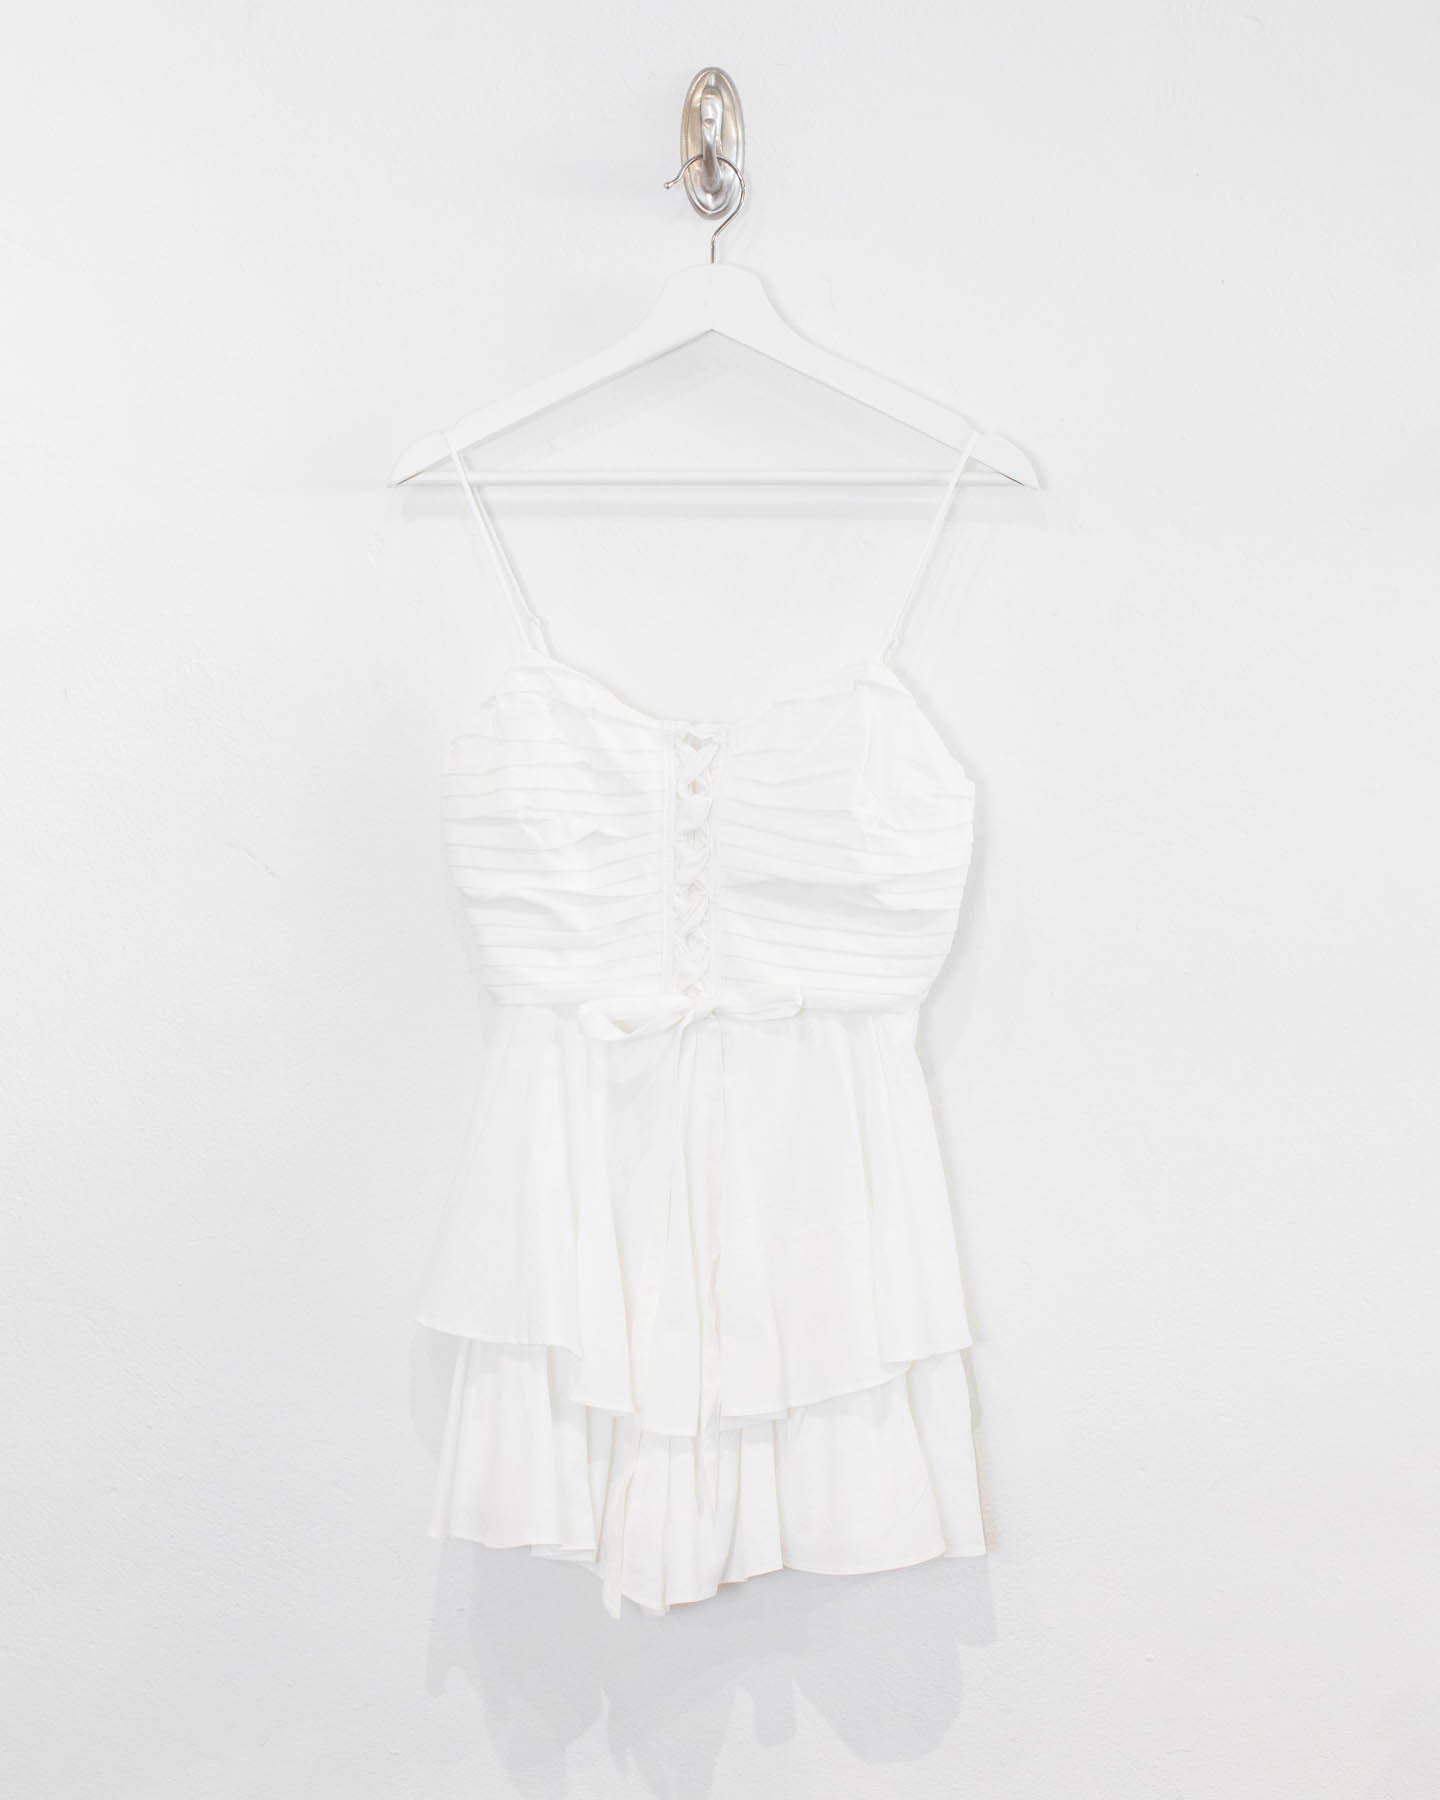 MS White Pleated Bodice Lace Up Romper